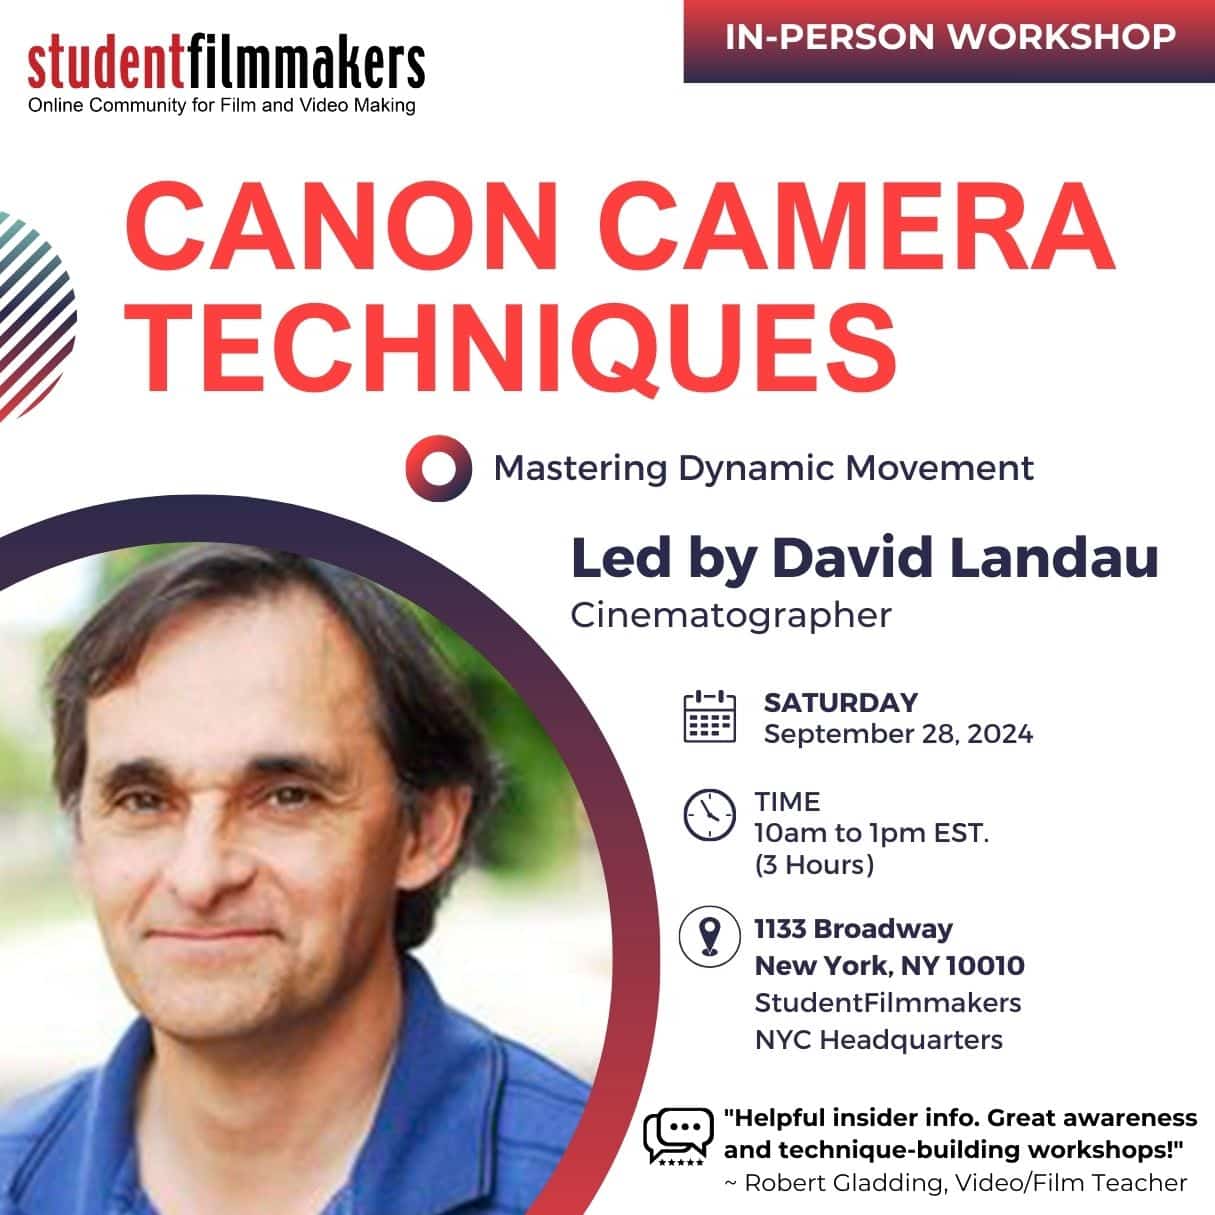 StudentFilmmakers.com In-Person Workshop - Canon Camera Techniques: Mastering Dynamic Movement Led by David Landau Date: Saturday, September 28, 2024 Time: 10am to 1pm Duration: 3 hours. Location: 1133 Broadway, New York, NY 10010